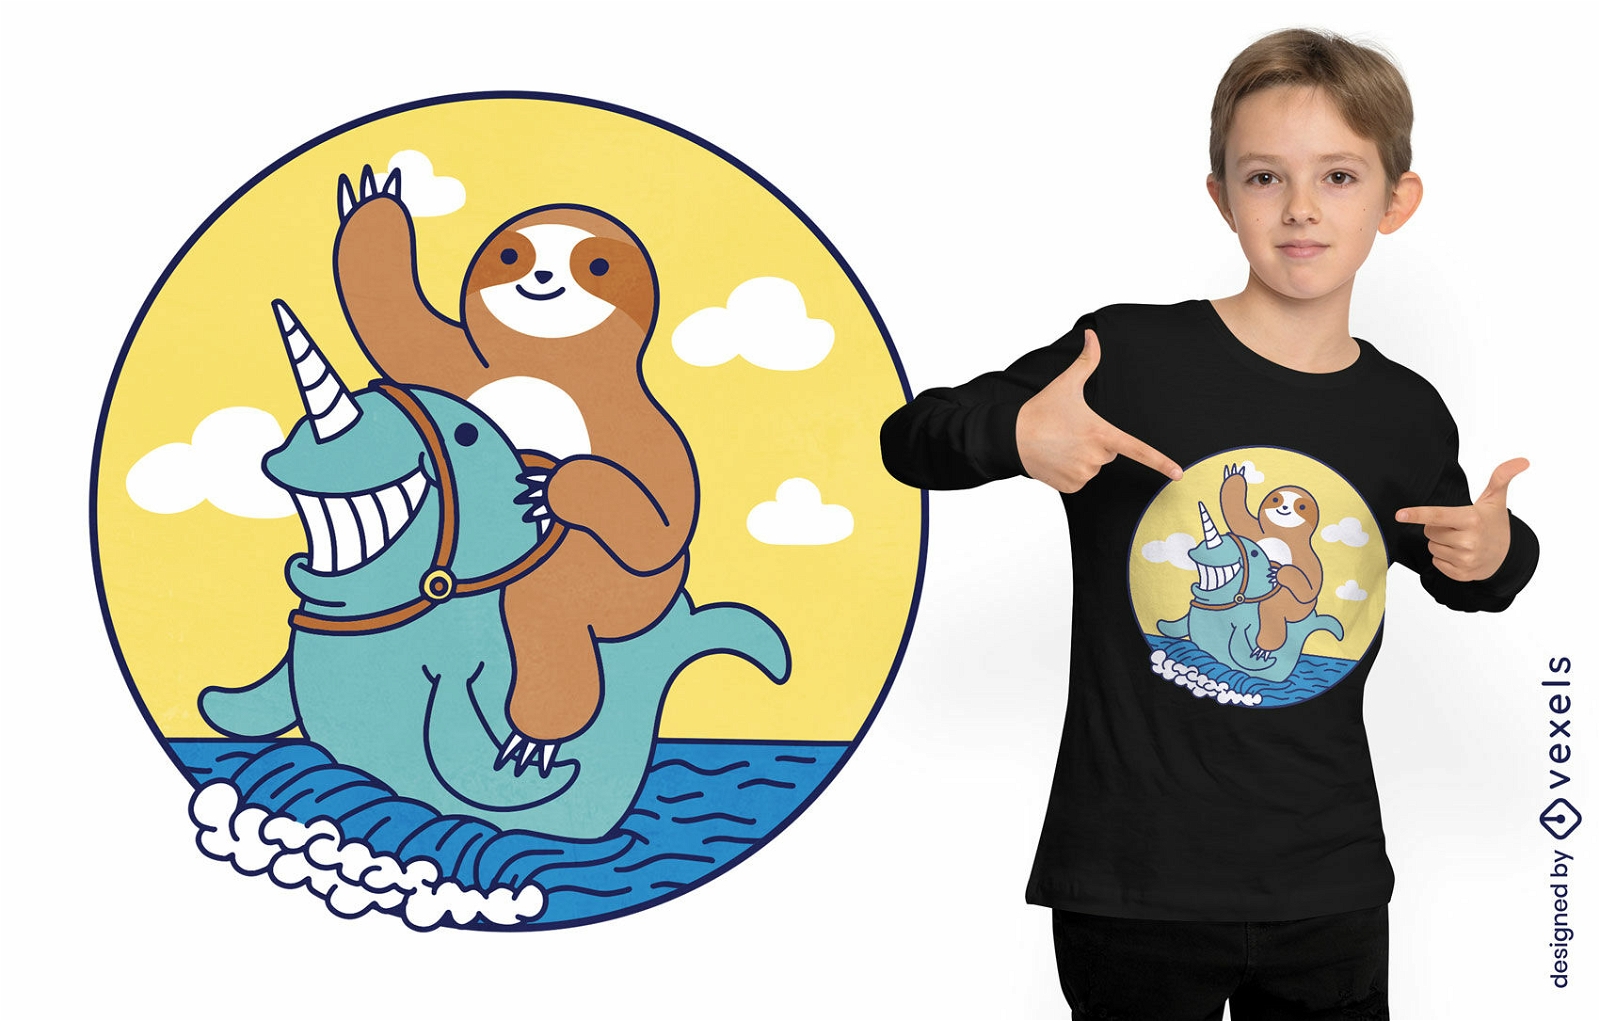 Sloth on narwhal riding wave t-shirt design